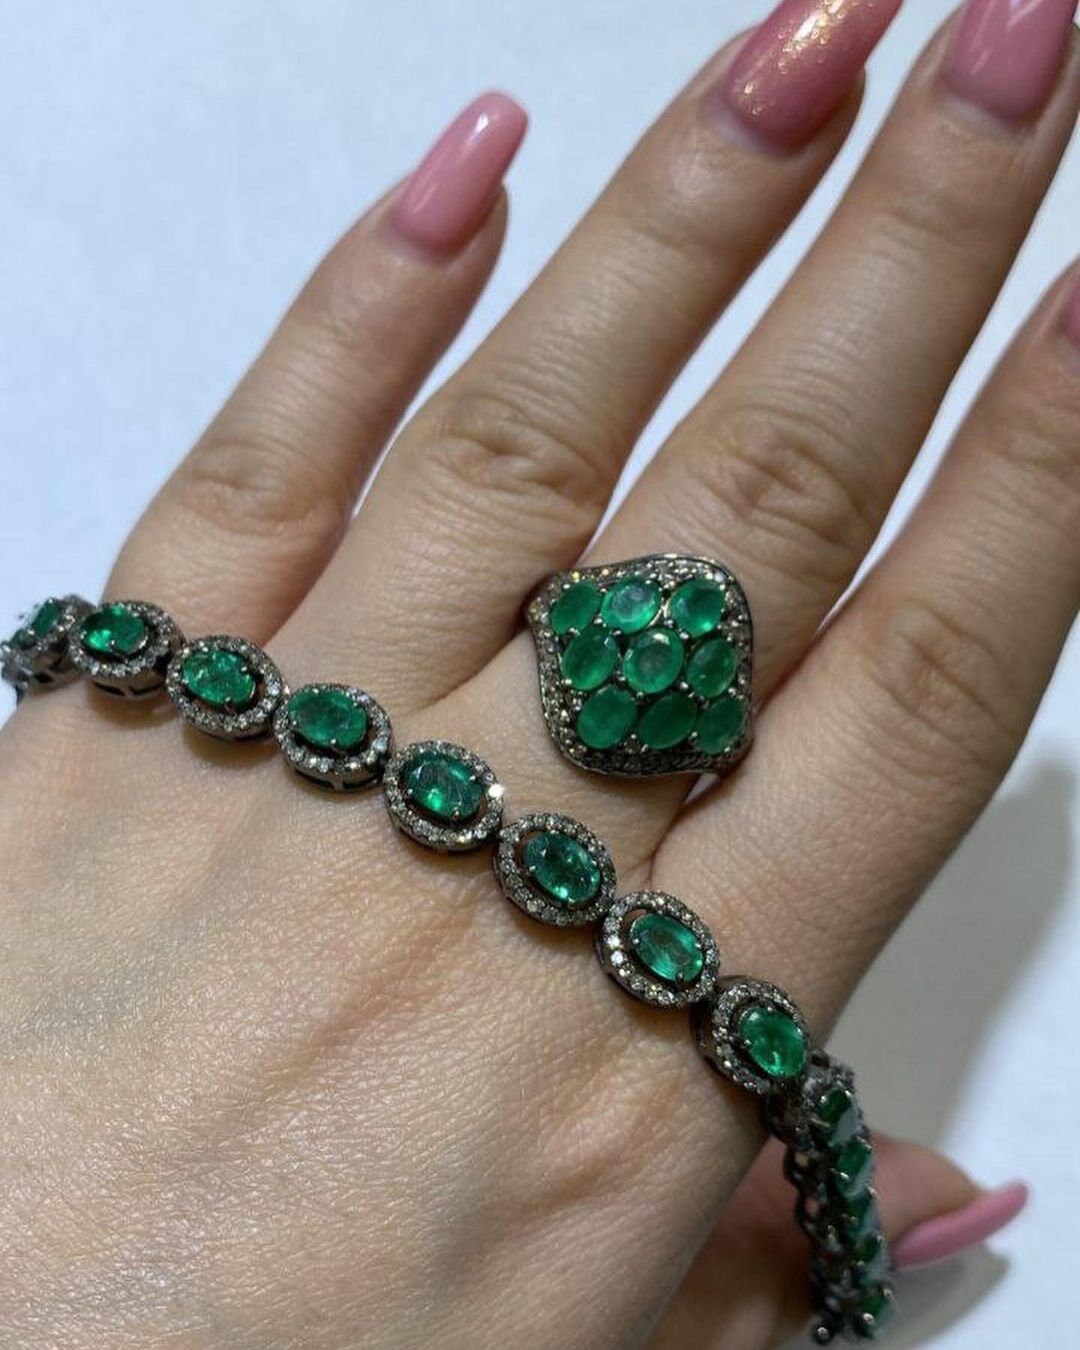 Natural Emerald & Pave Diamond Gemstone Ring 925 Sterling Silver Gift Jewelry